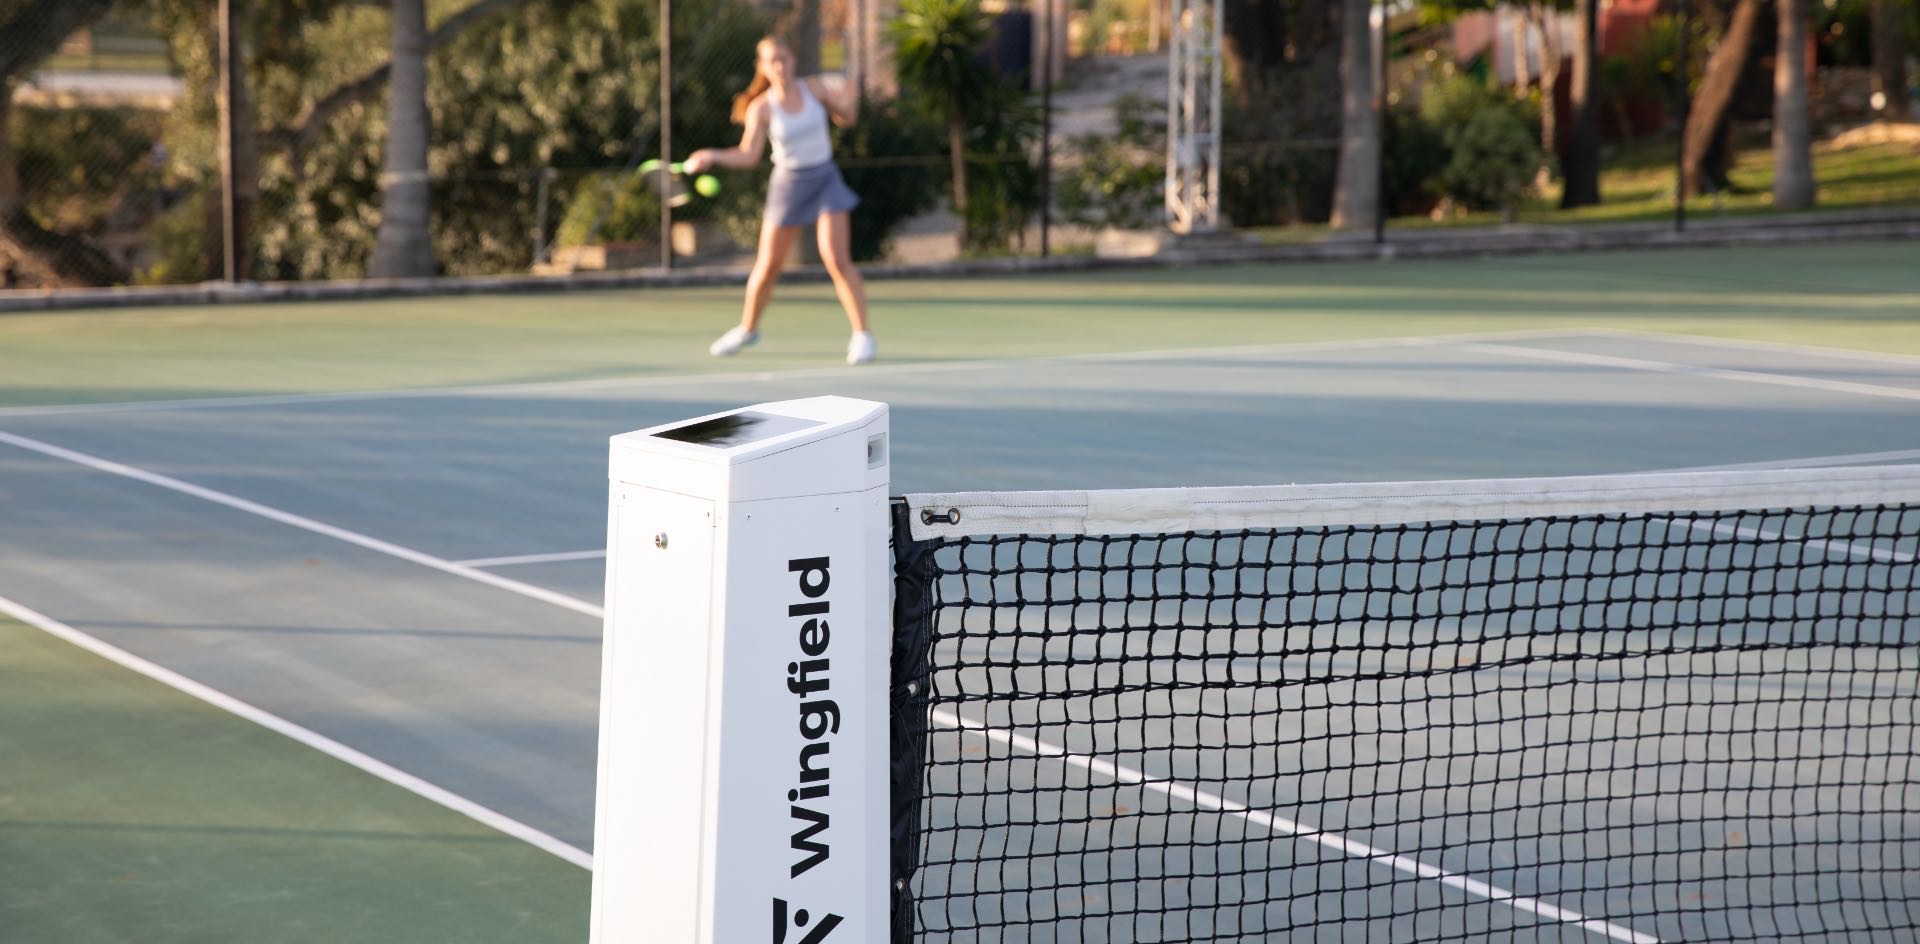 The white Wingfield Box on a hard court. A tennis player in the background.